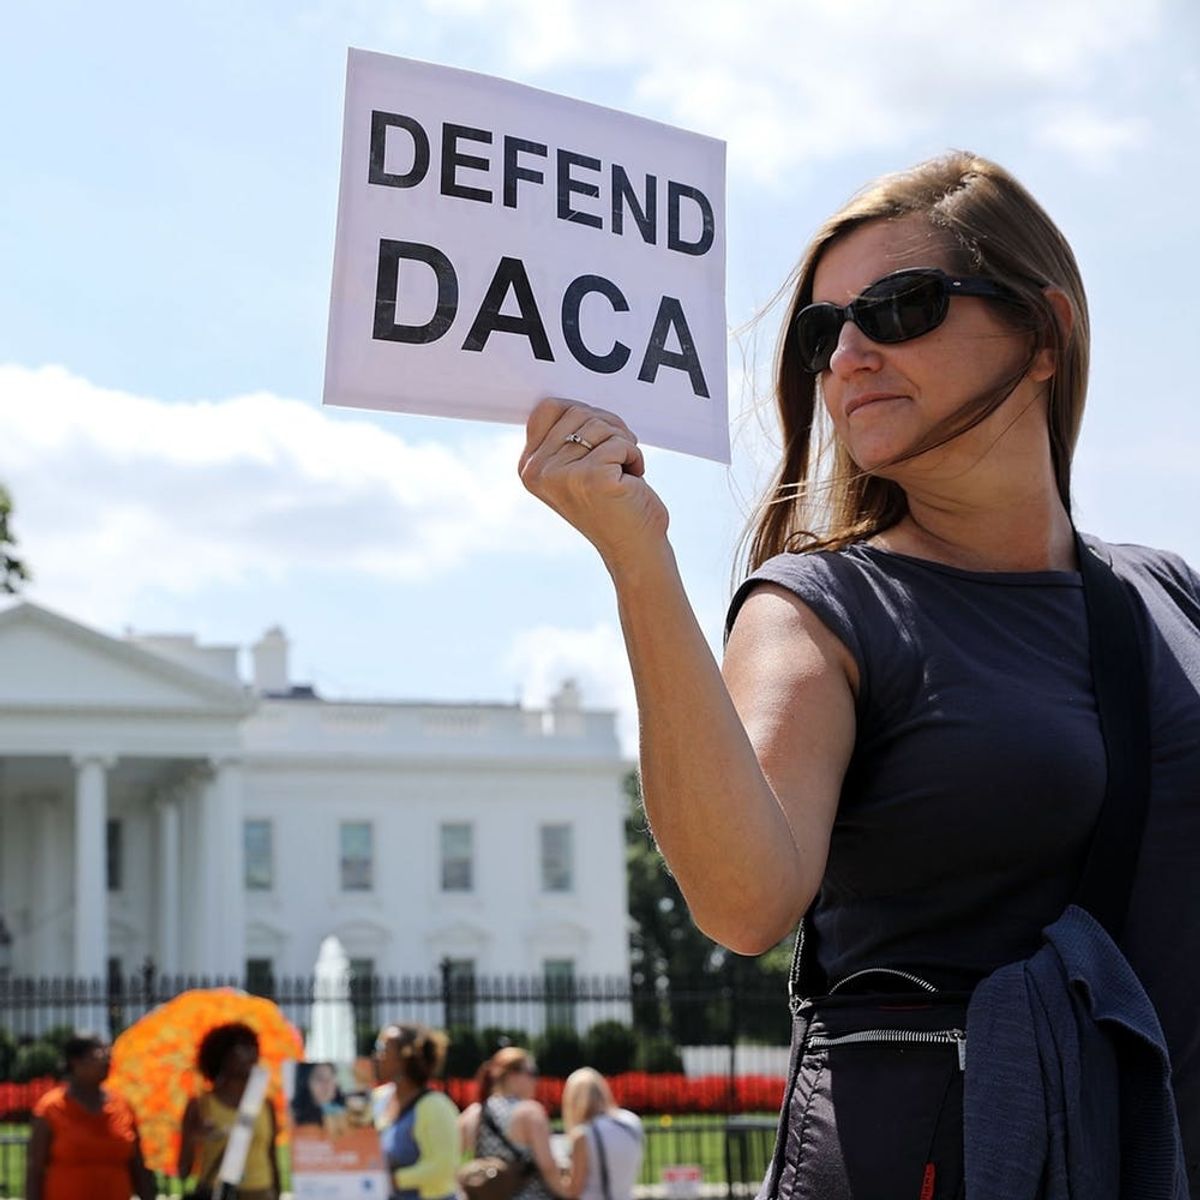 The Trump Administration Is Ending DACA — Here’s What’s at Stake